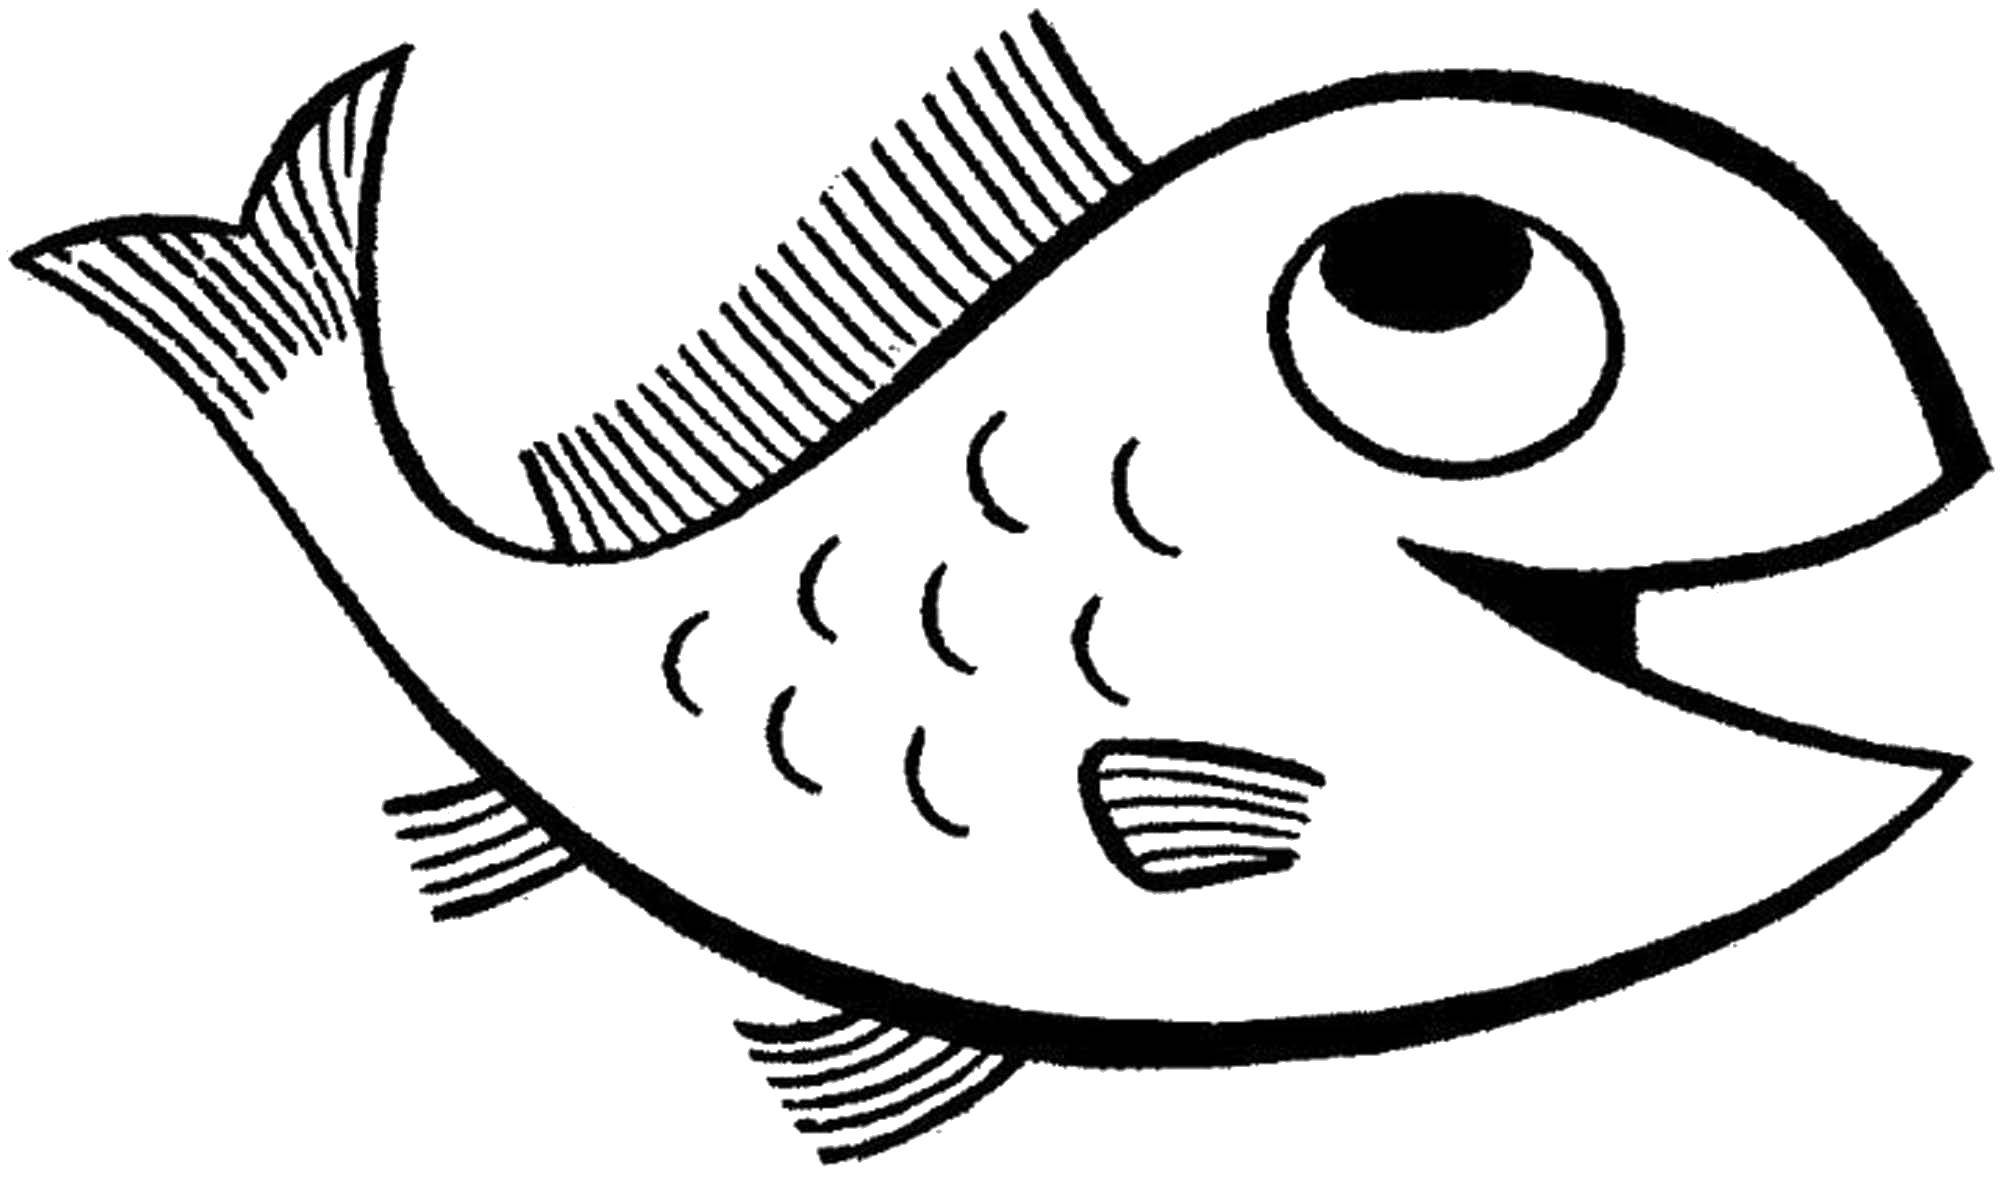 Coloring Funny fish. Category fish. Tags:  Underwater world, fish.